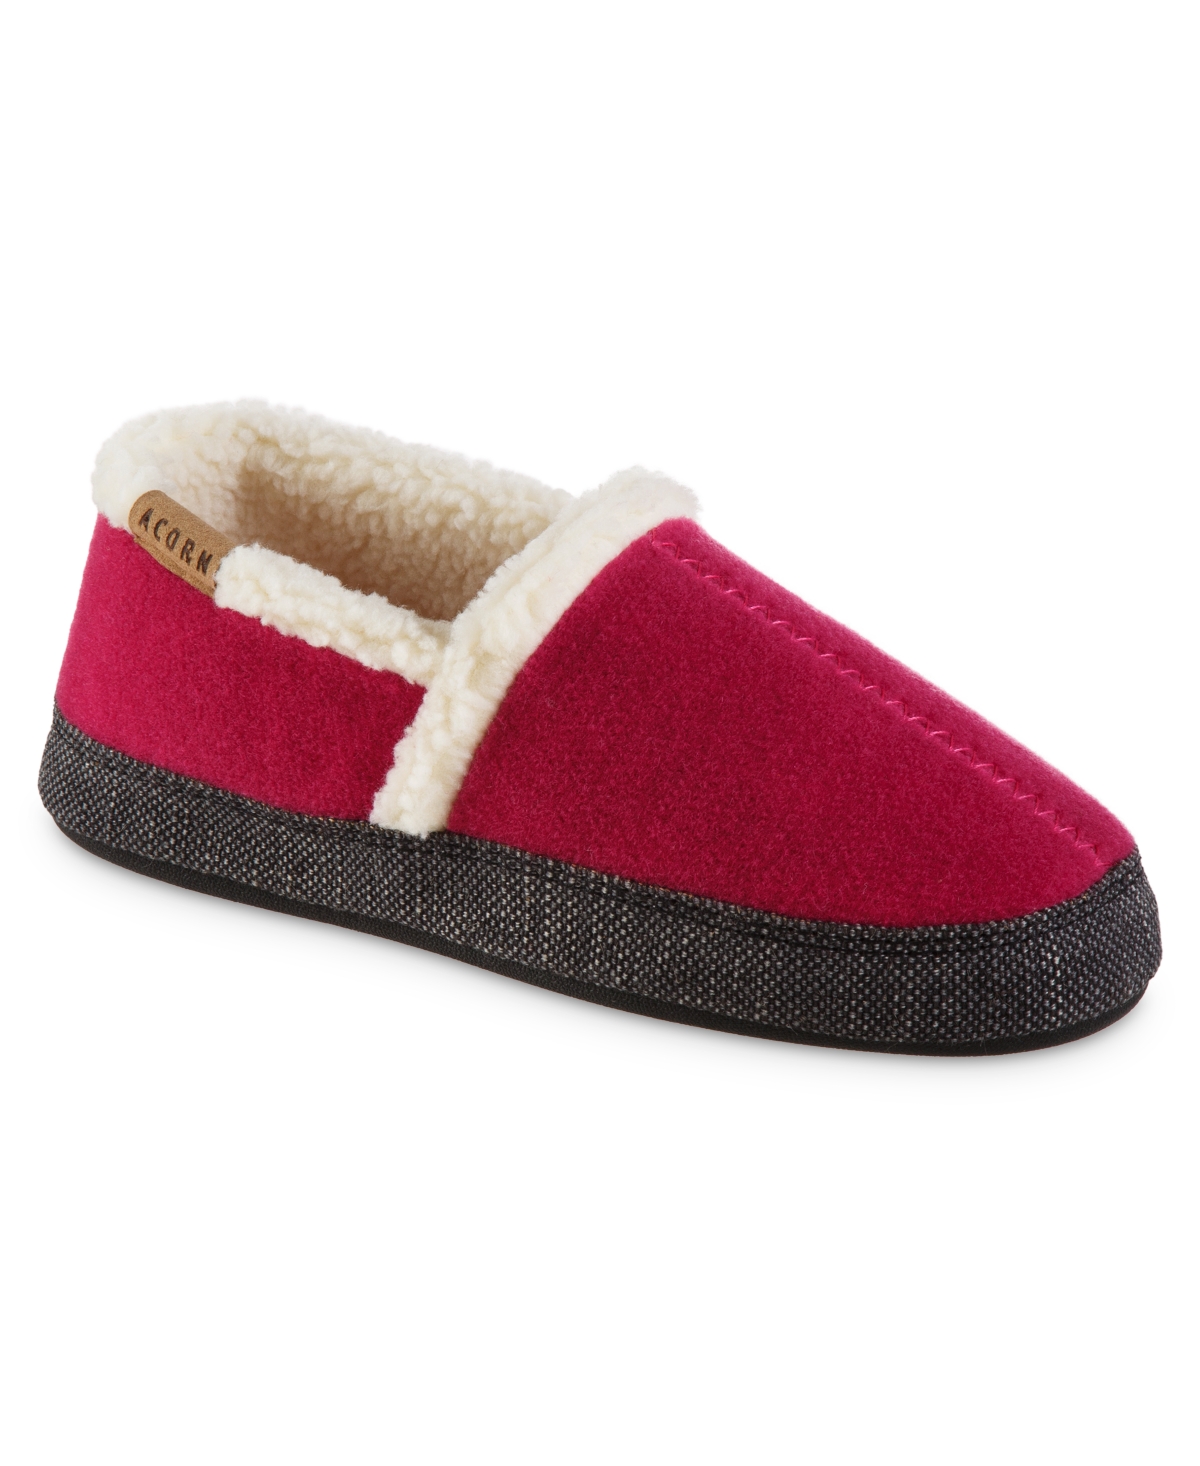 Acorn Women's Madison Moccasin Slippers Women's Shoes